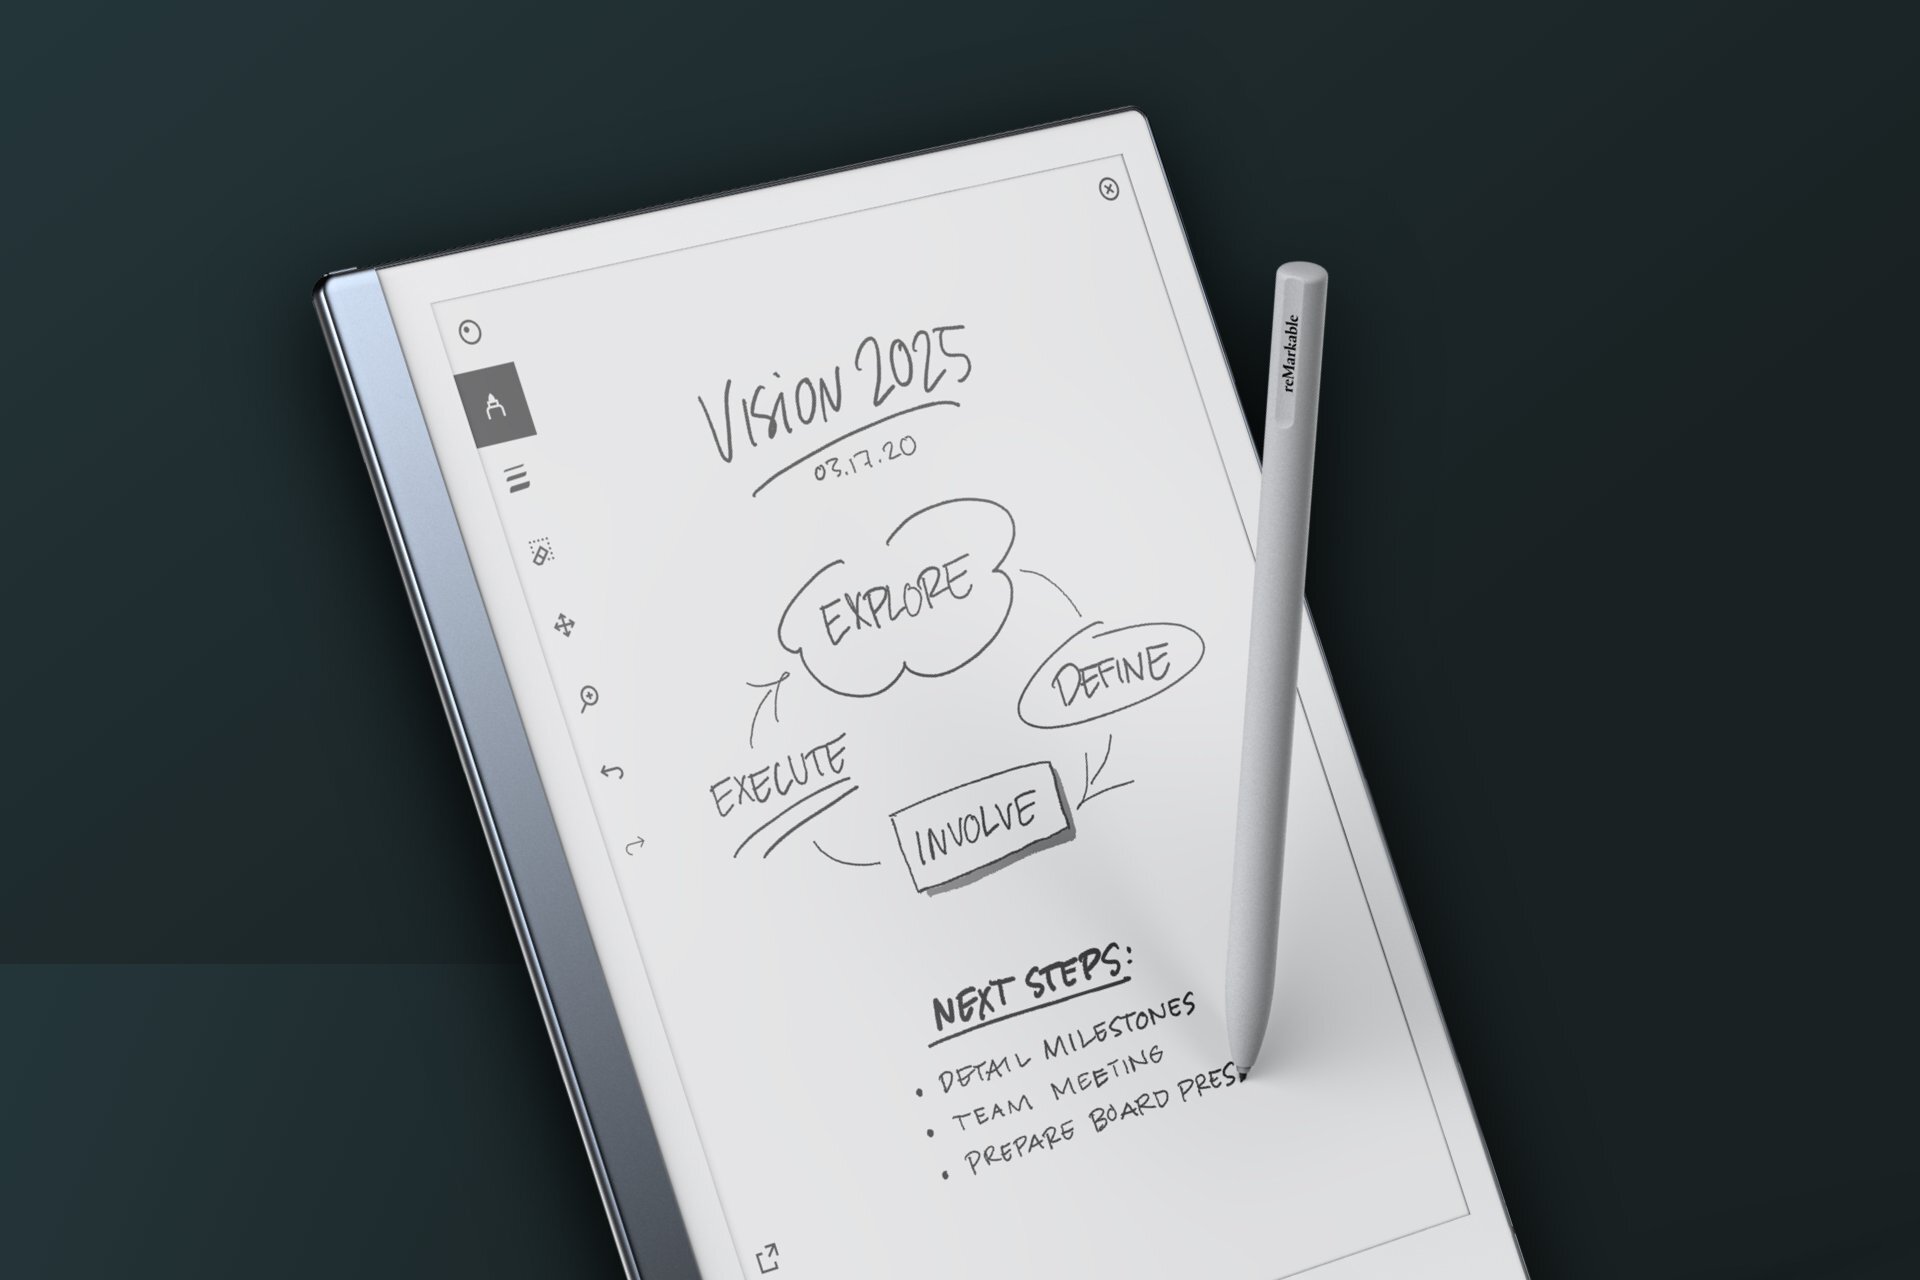 ReMarkable 2 is the best paper-like tablet for sketching and notes